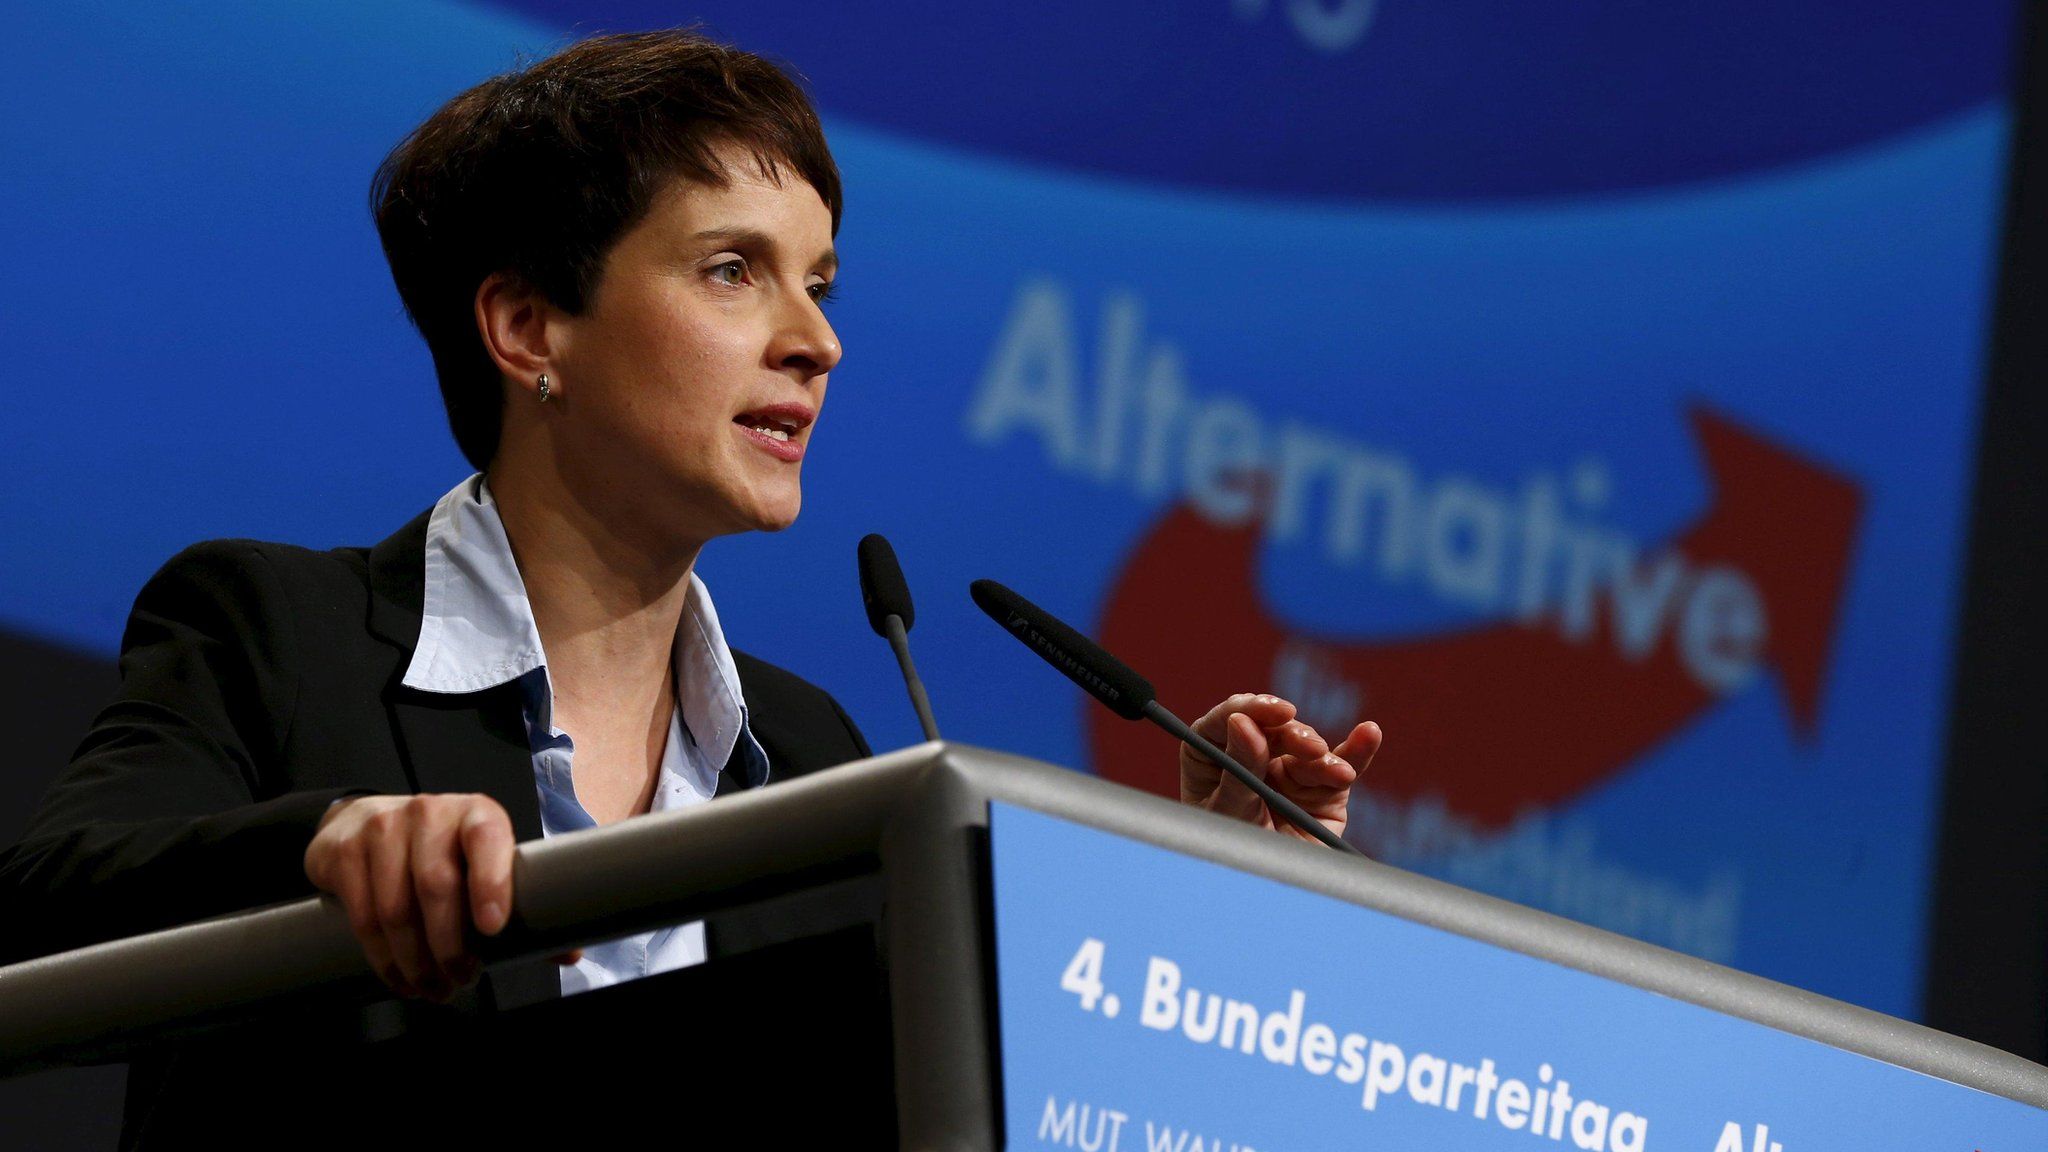 Frauke Petry, leader of the AfD party, speaking in Hannover (file photo - November 2015)